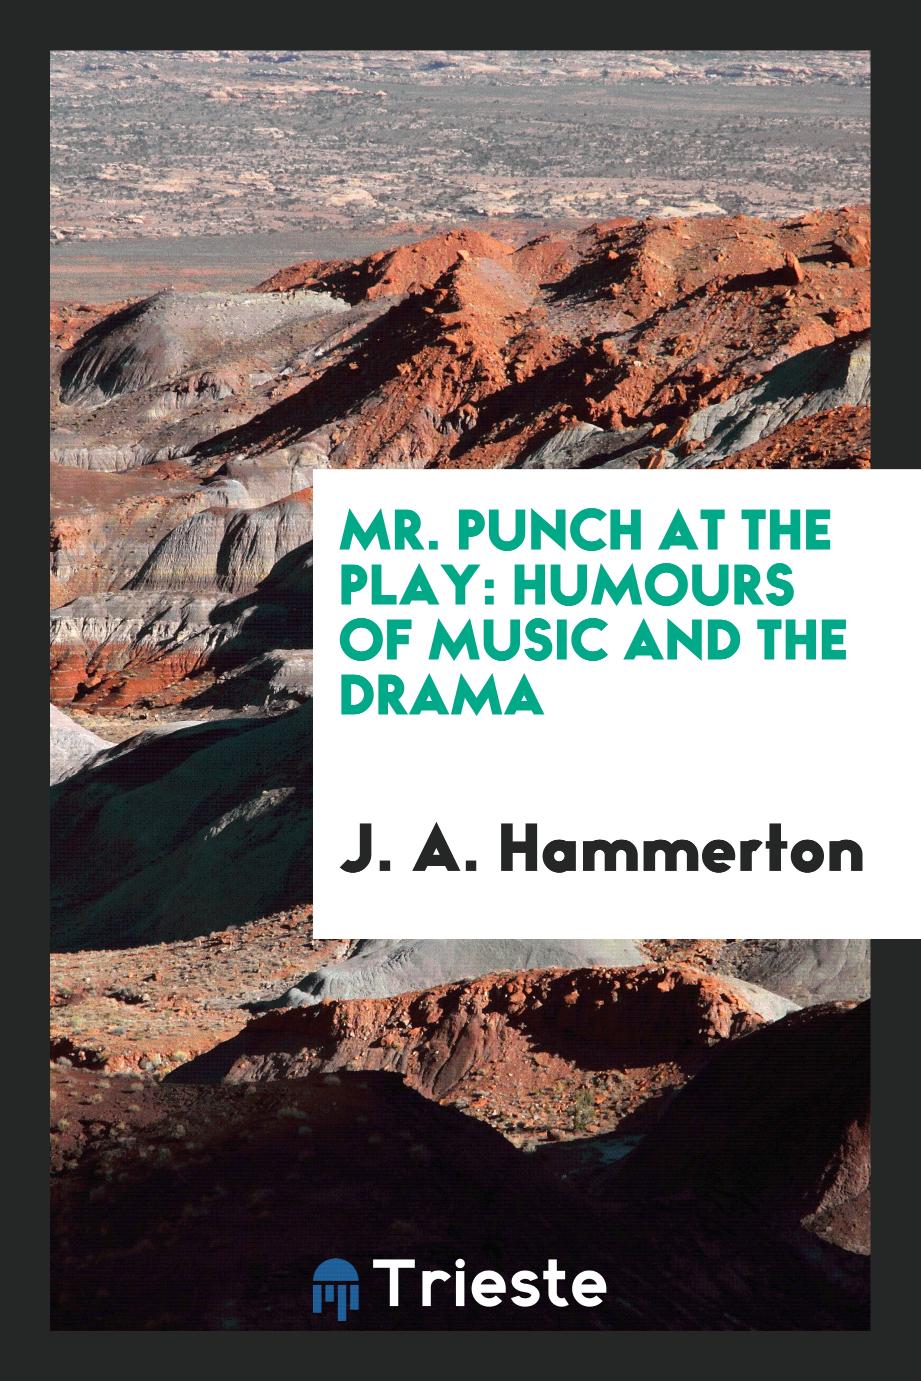 Mr. Punch at the play: humours of music and the drama